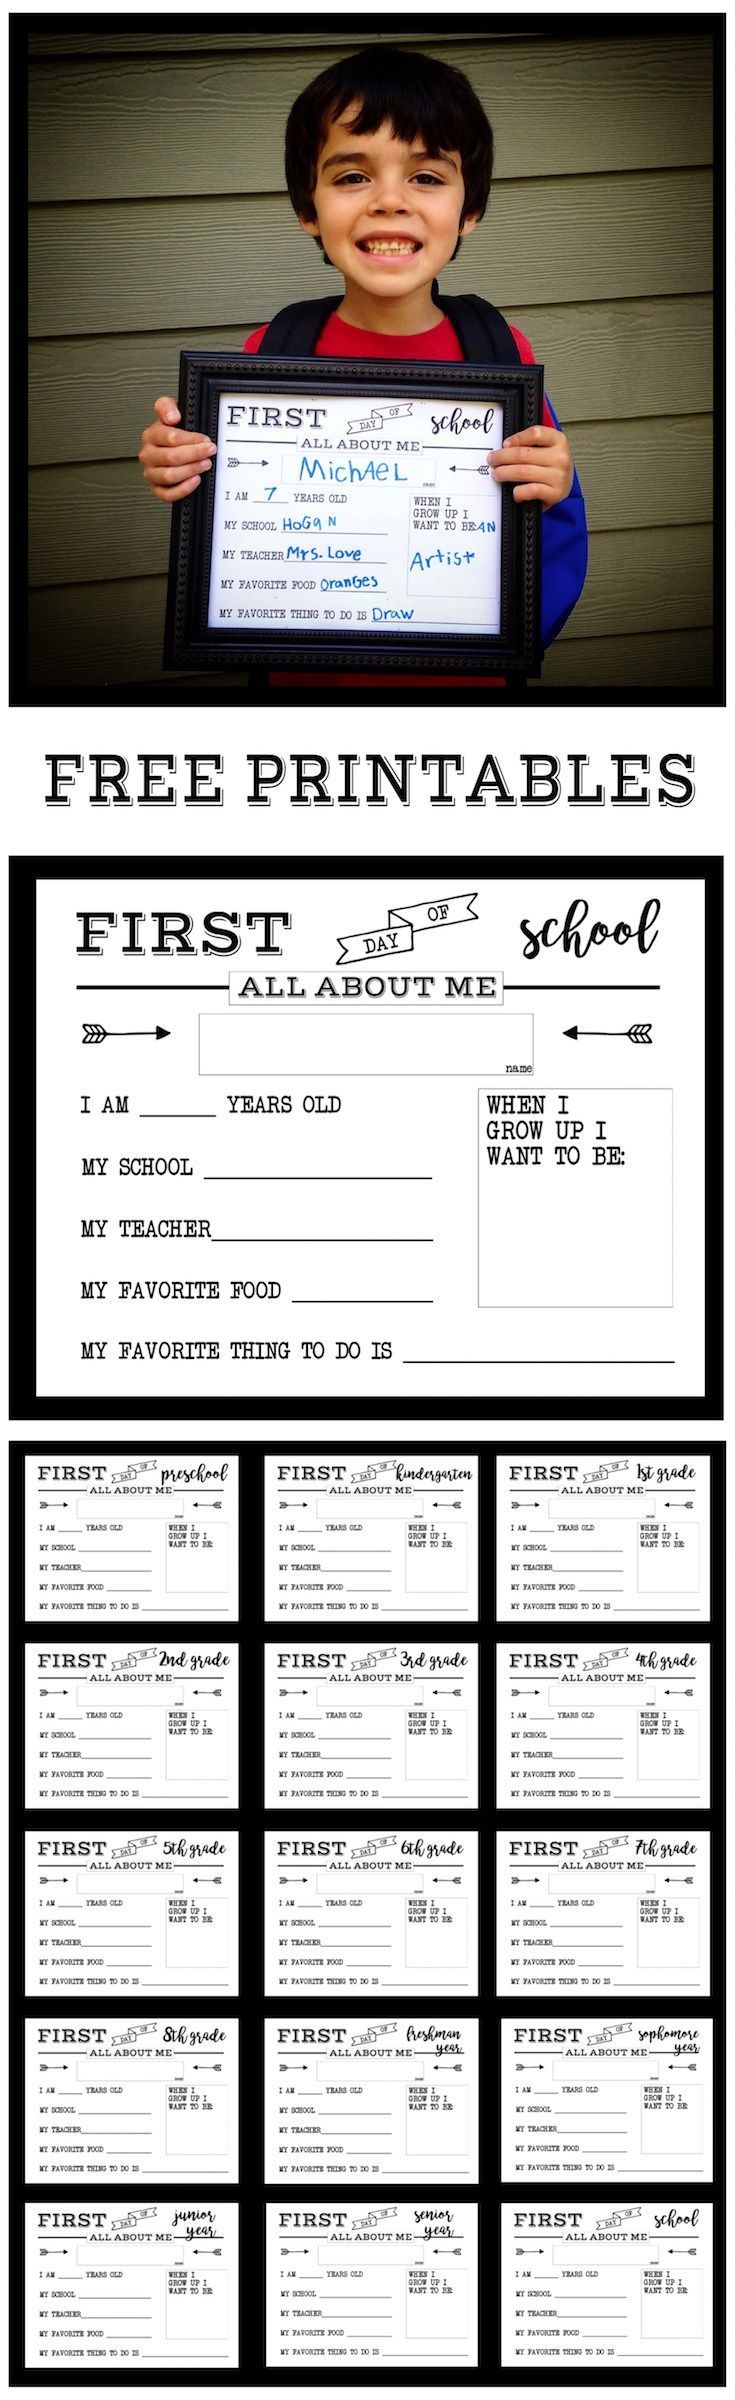 First Day of School All About Me sign free printable sign. Preschool and Kindergarten through Senior year. Print this sign for